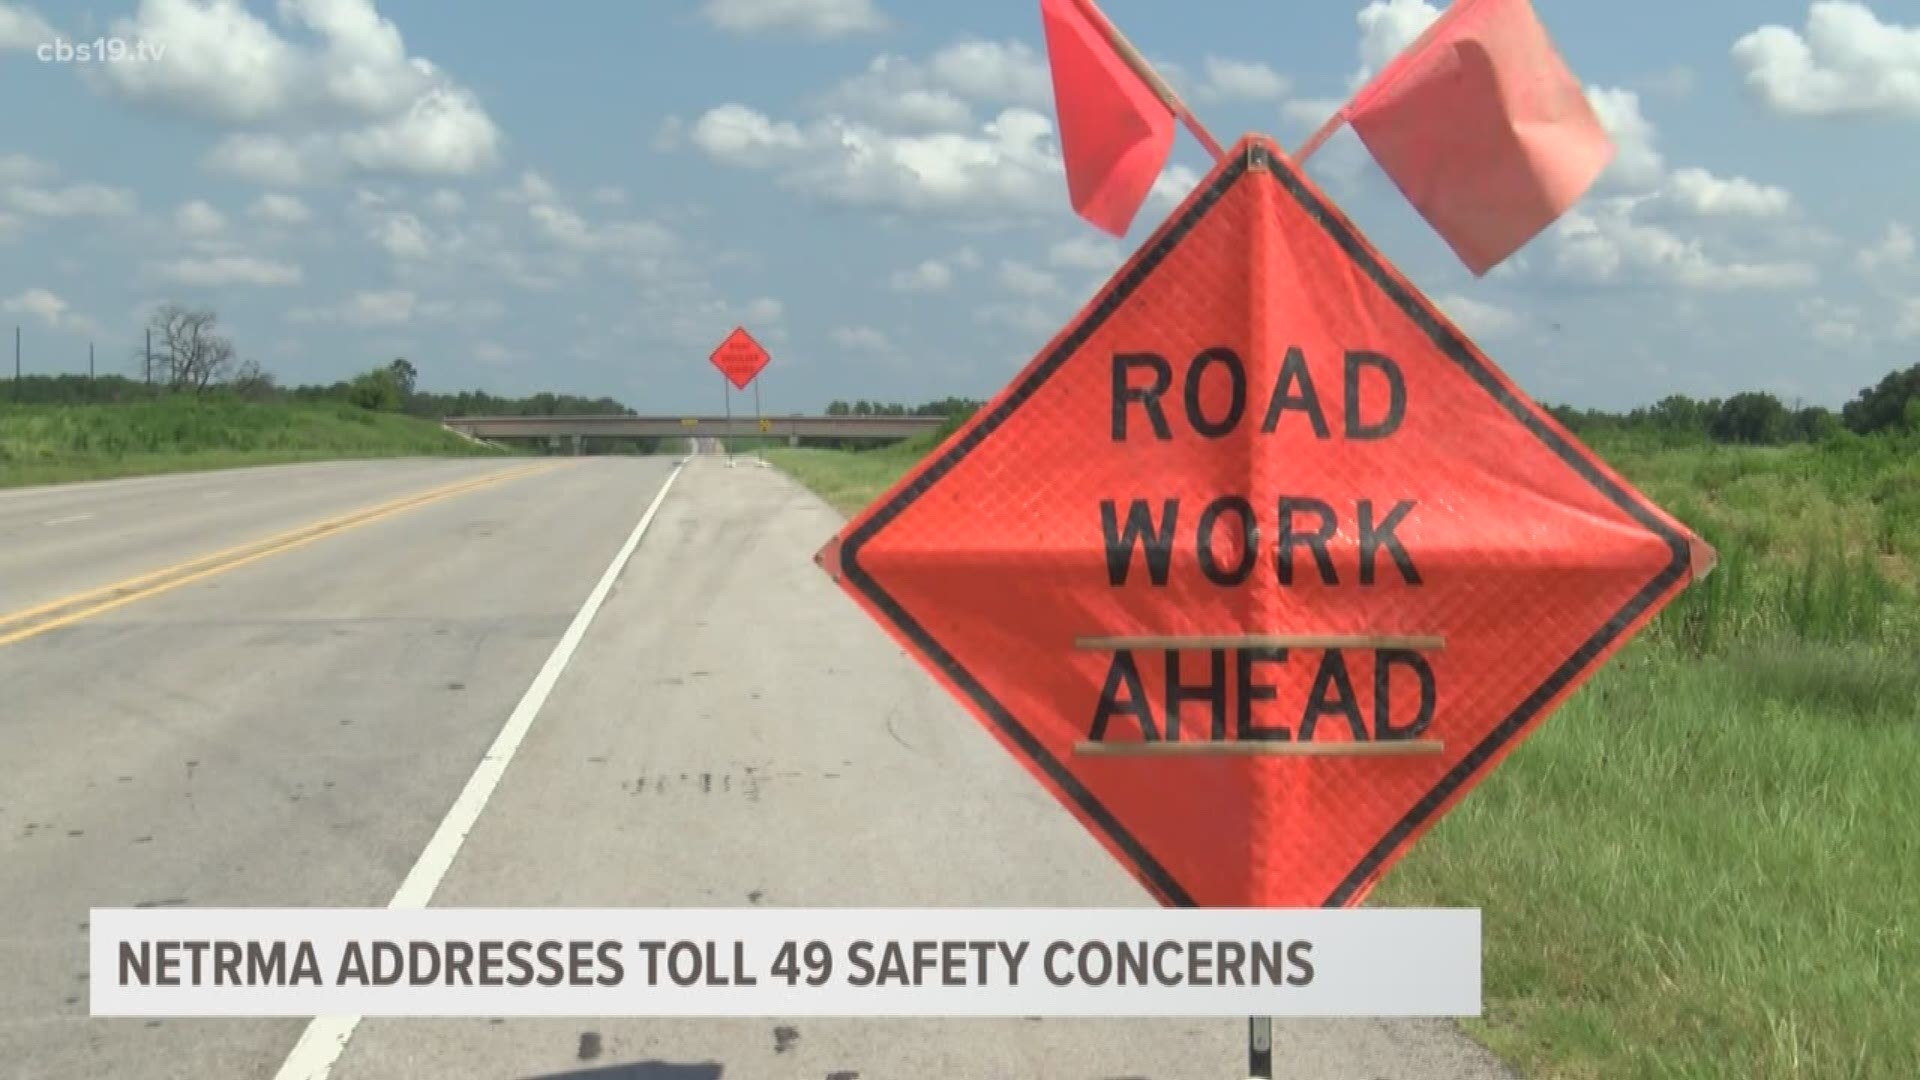 After a three vehicle crash on Monday, NetRMA addressed safety concerns on the toll road. They explain most of the accidents are caused by distracted driving